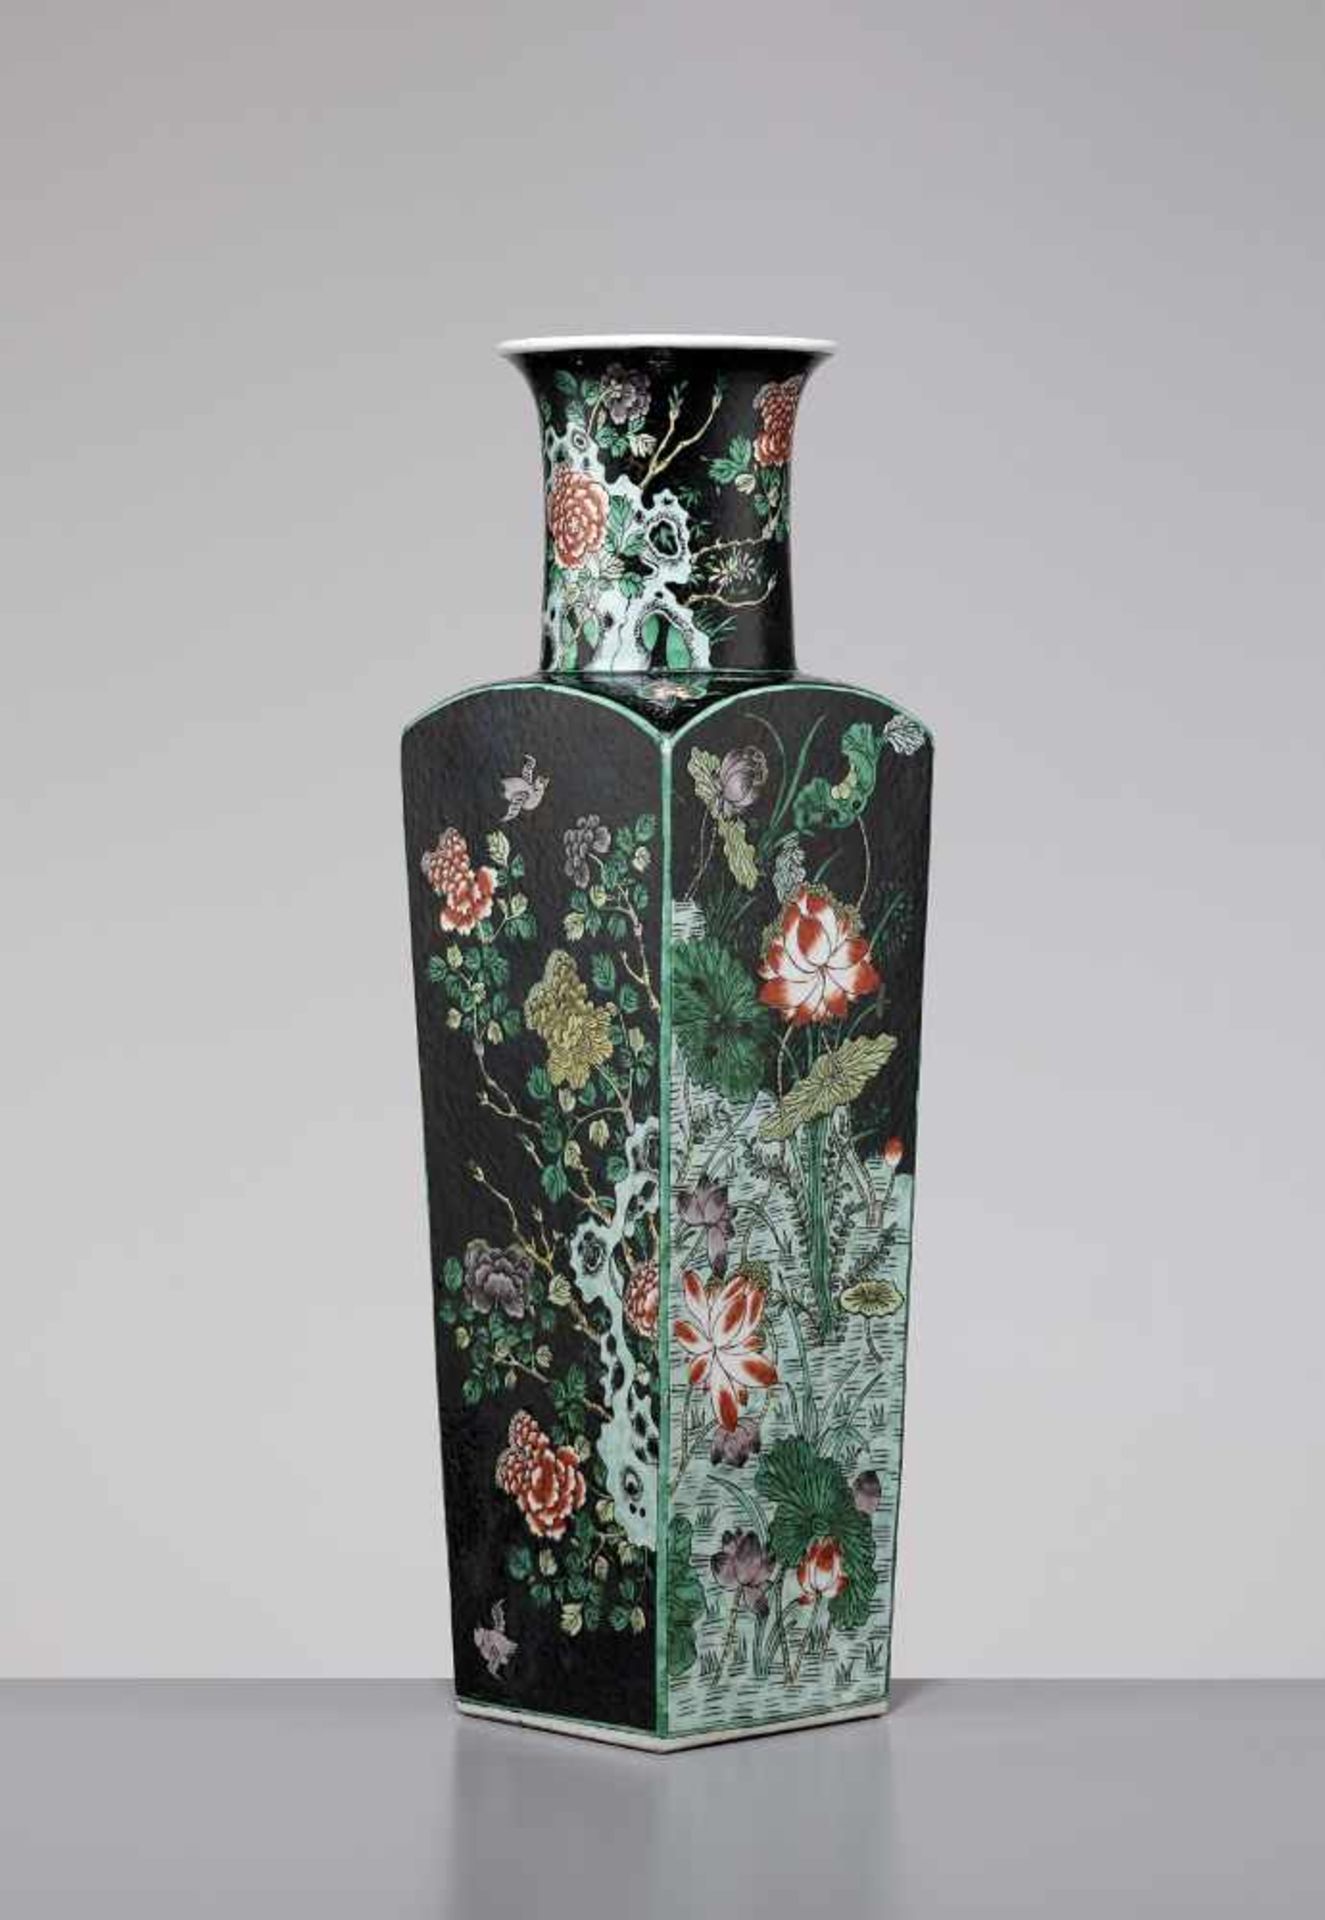 A FAMILLE NOIRE SQUARE VASE, QINGChina, 19th century. Bright yellow, aubergine and green enamels